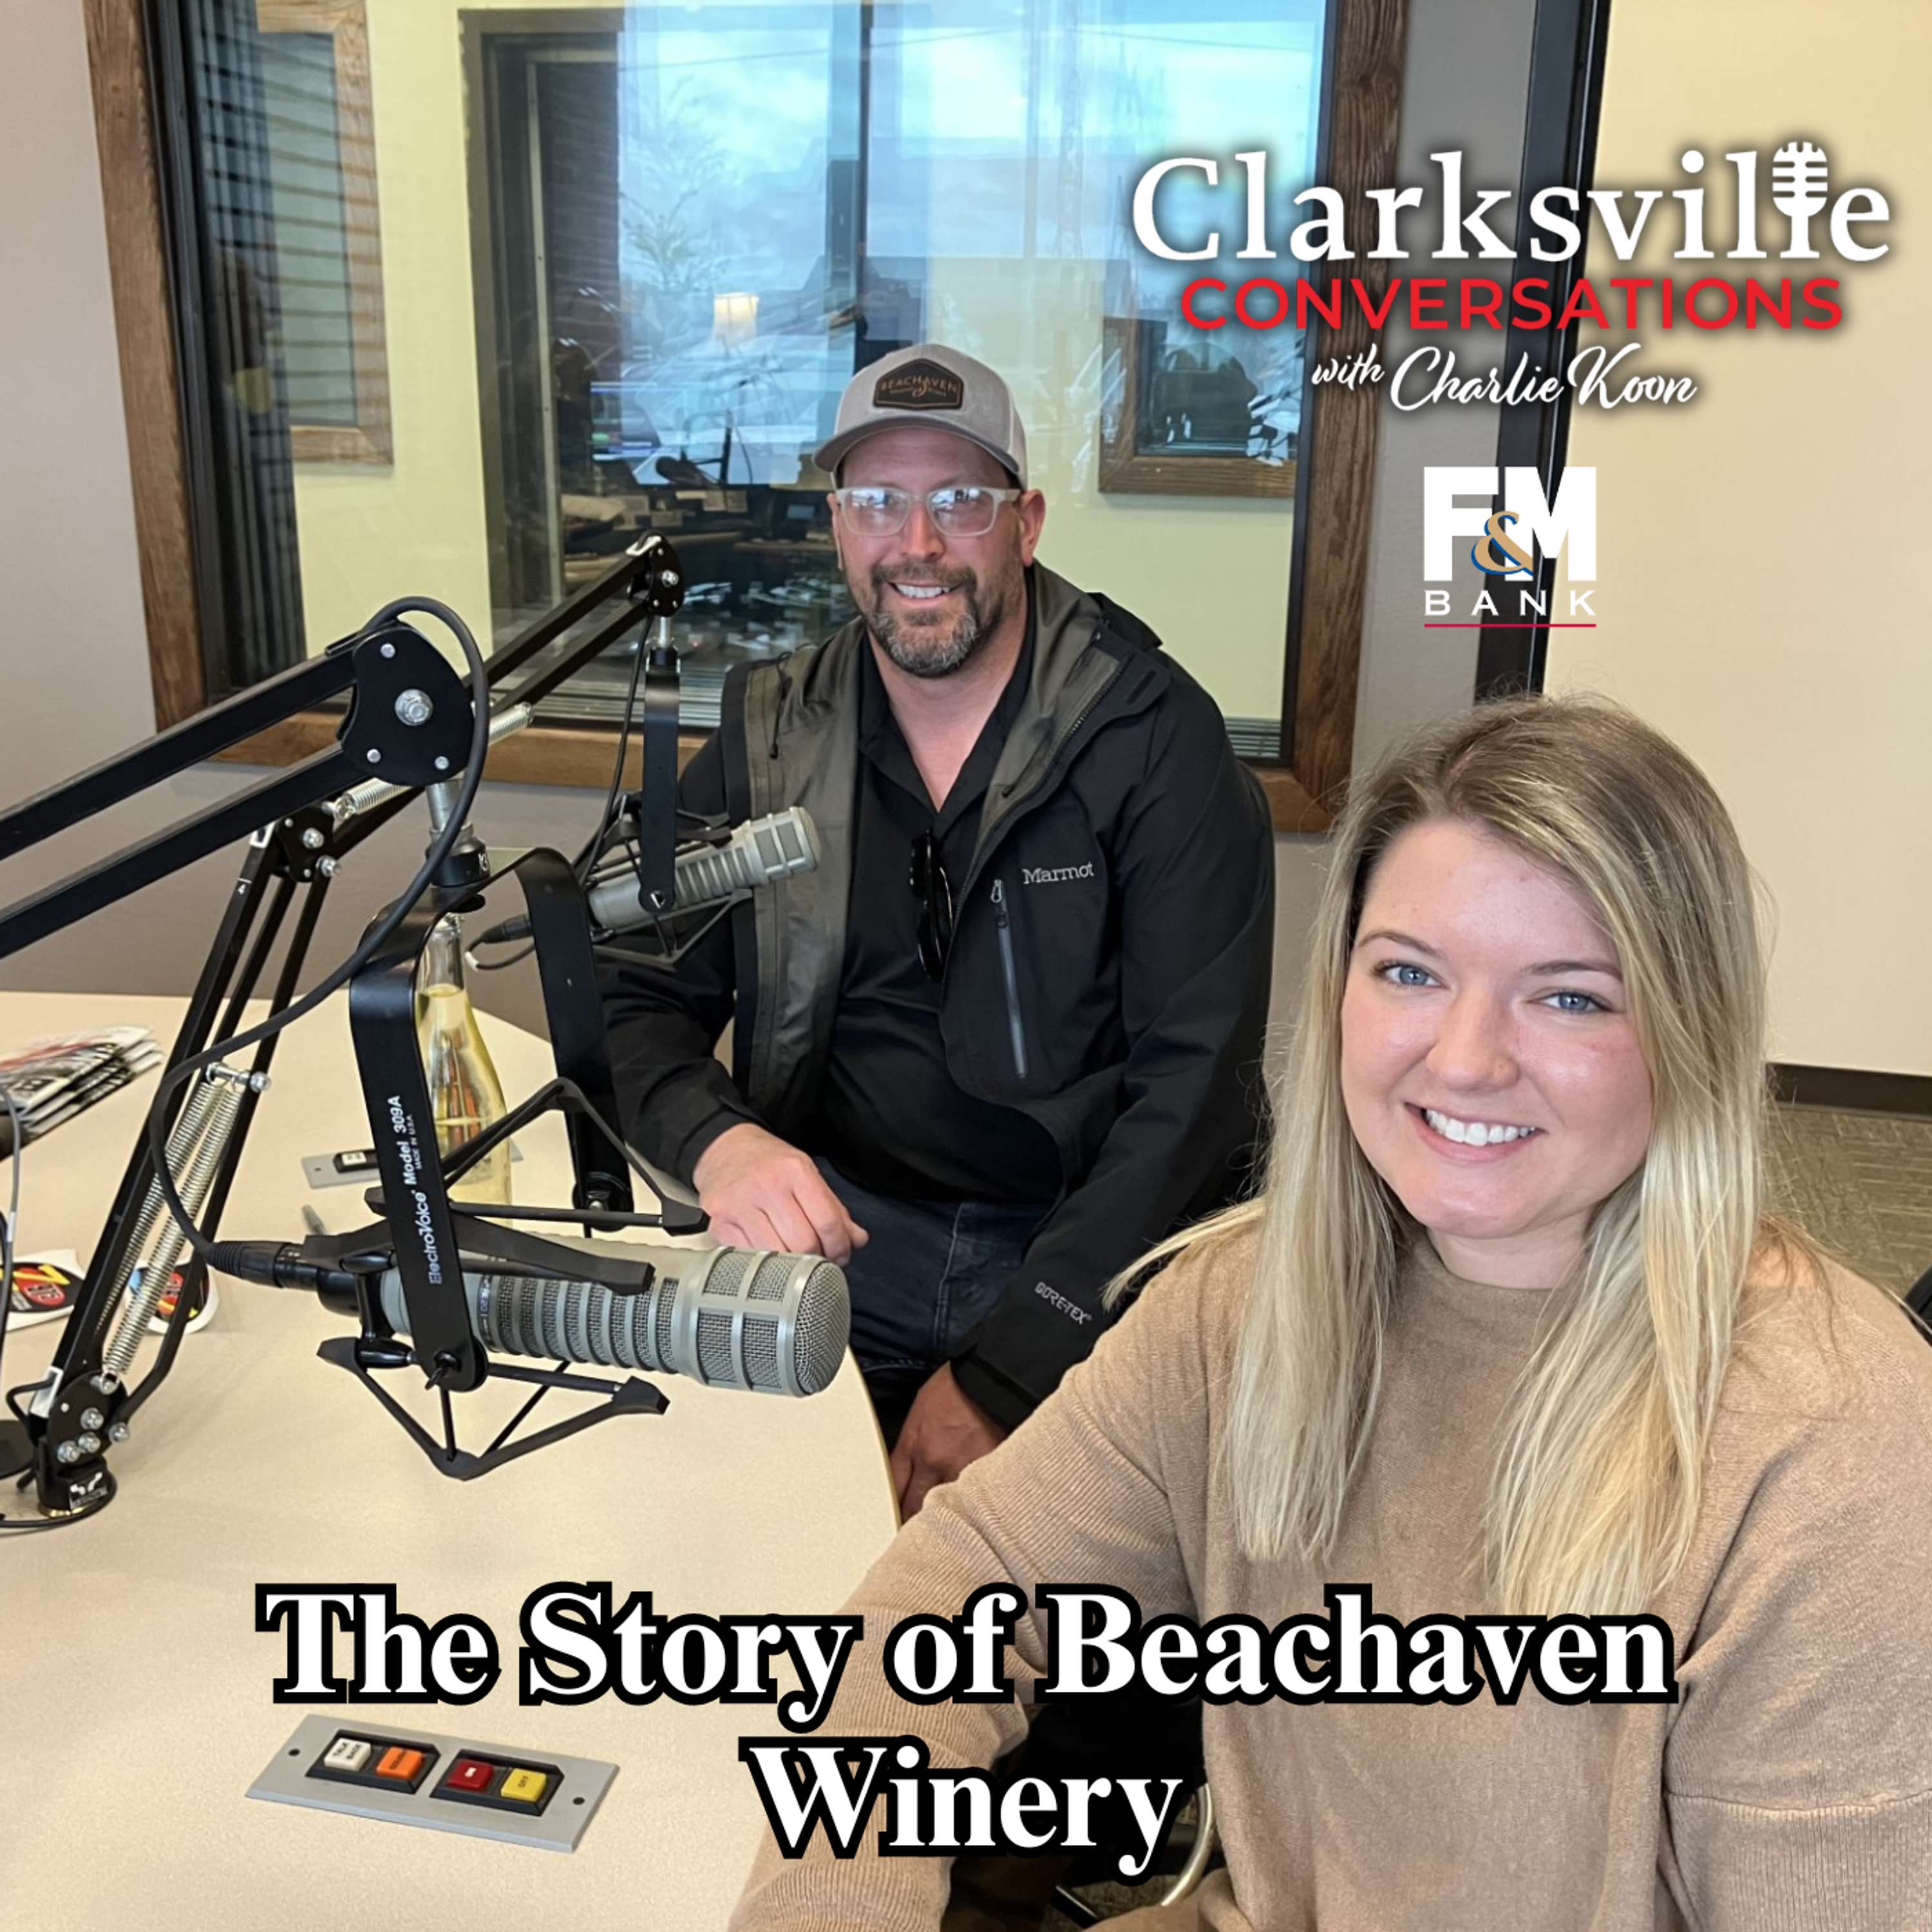 The Story of Beachaven Winery